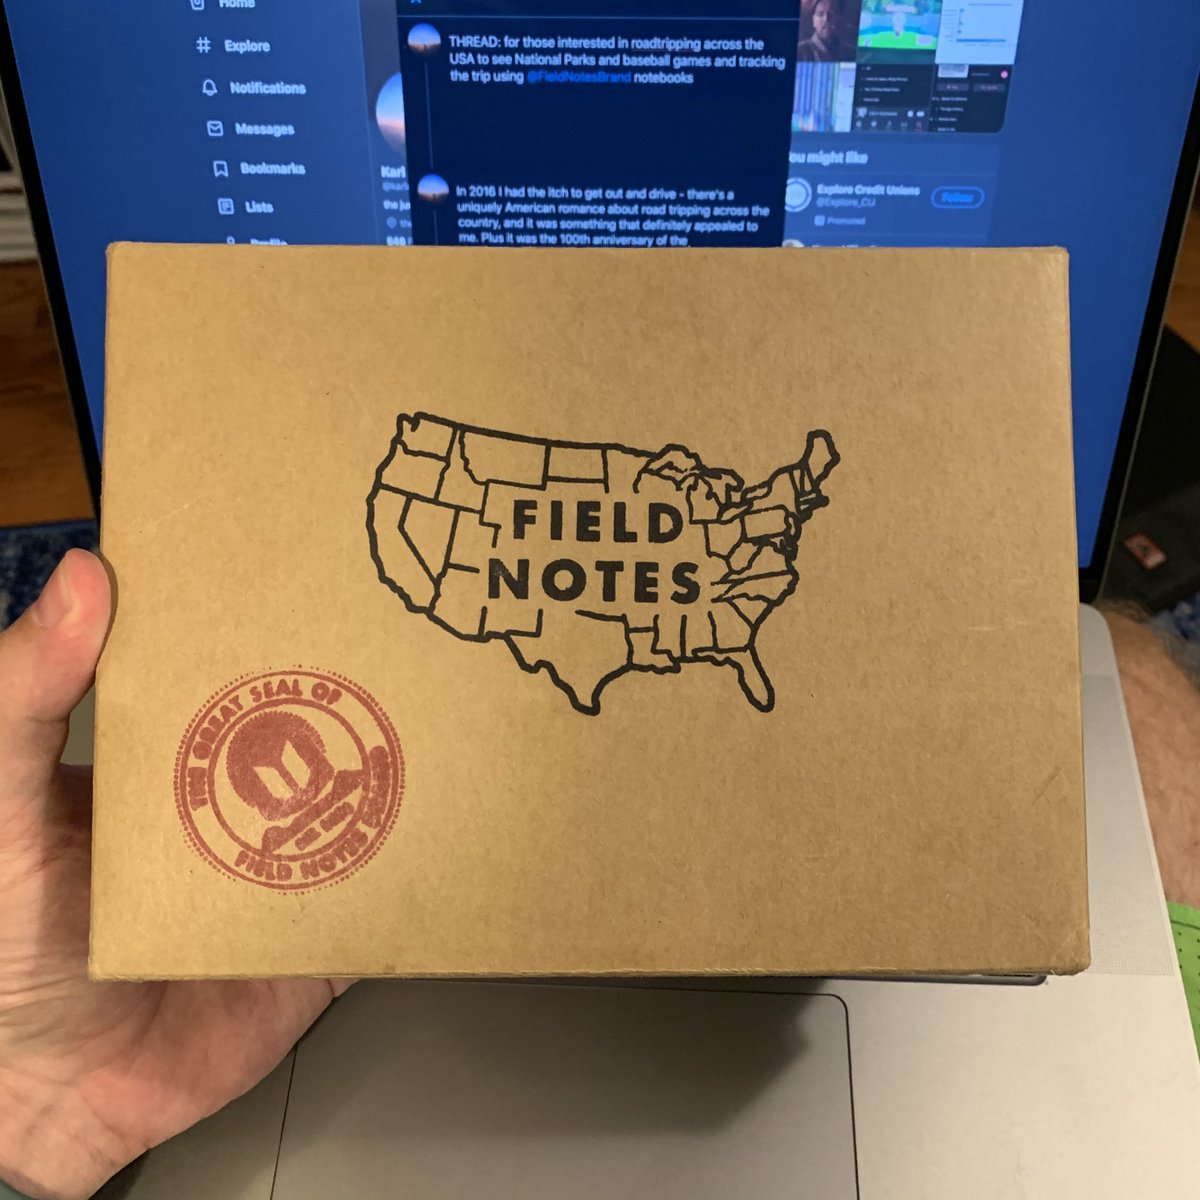 Important stage-setting: I am a daily user of  @FieldNotesBrand notebooks (since July 18, 2011 when I started my first book). They are the best dang notebooks in the world. My first purchase included a box set with one notebook from each state (the "County Fair edition).